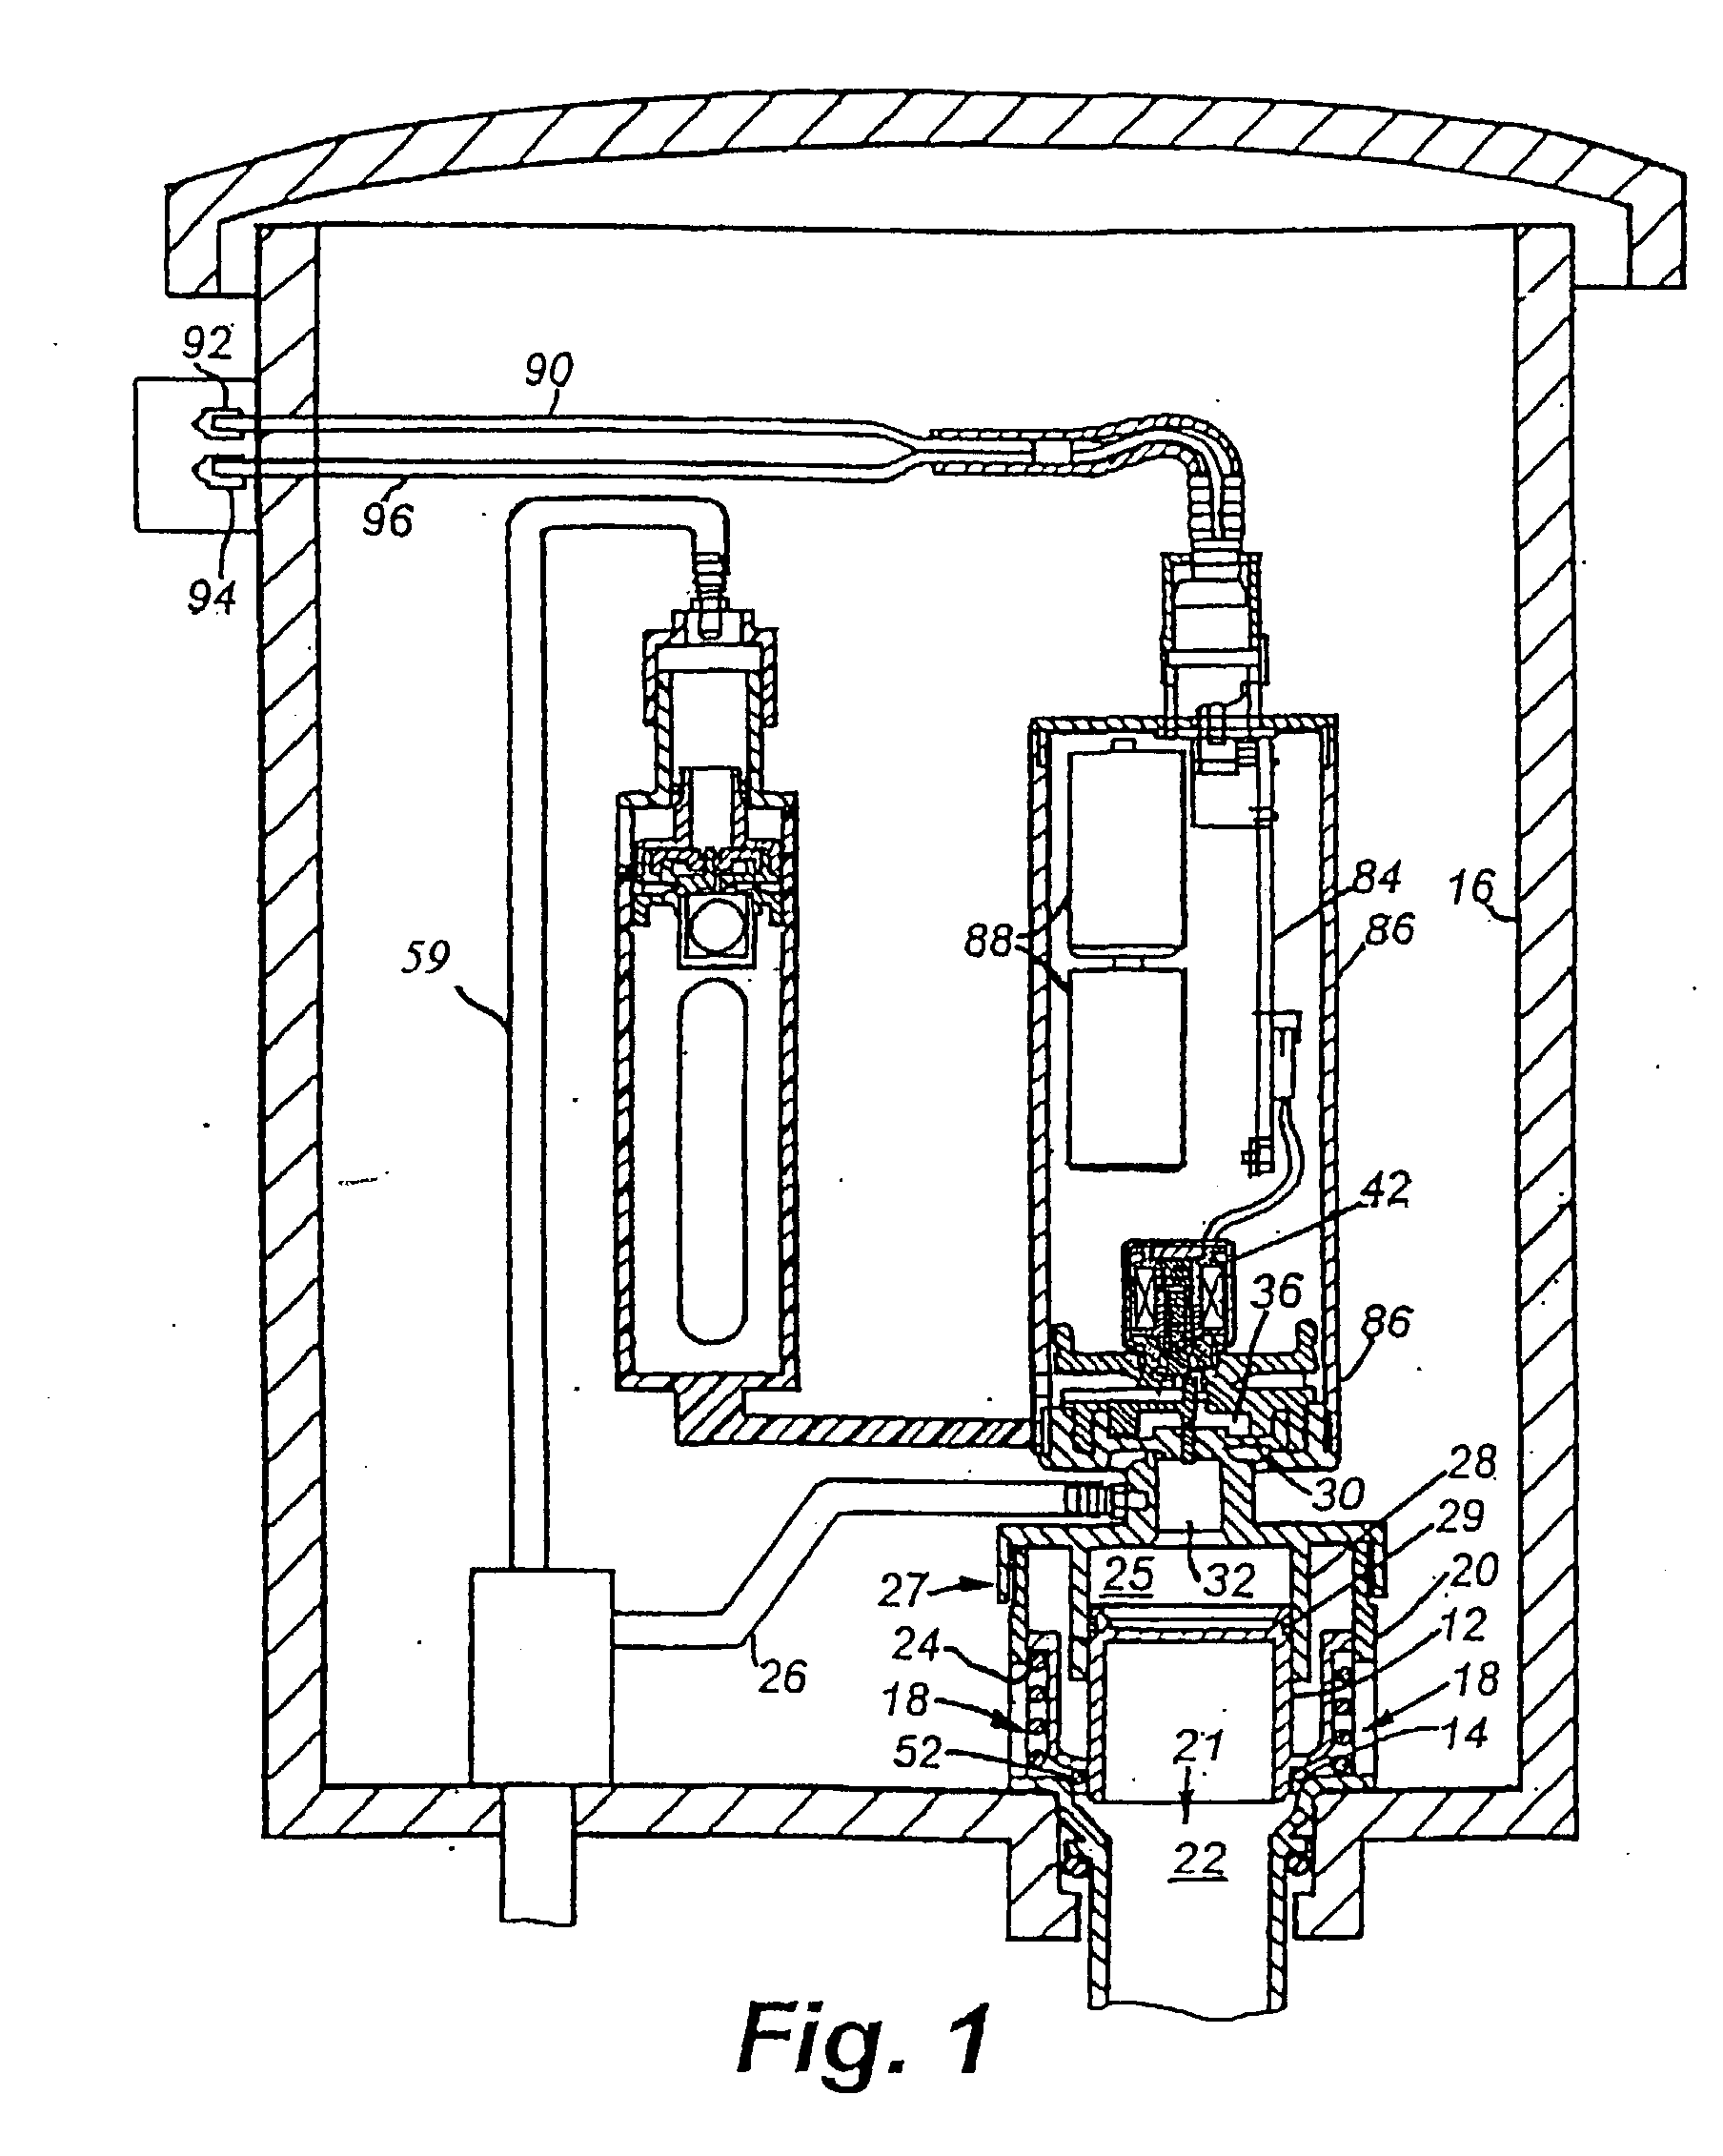 Toilet flusher with novel valves and controls